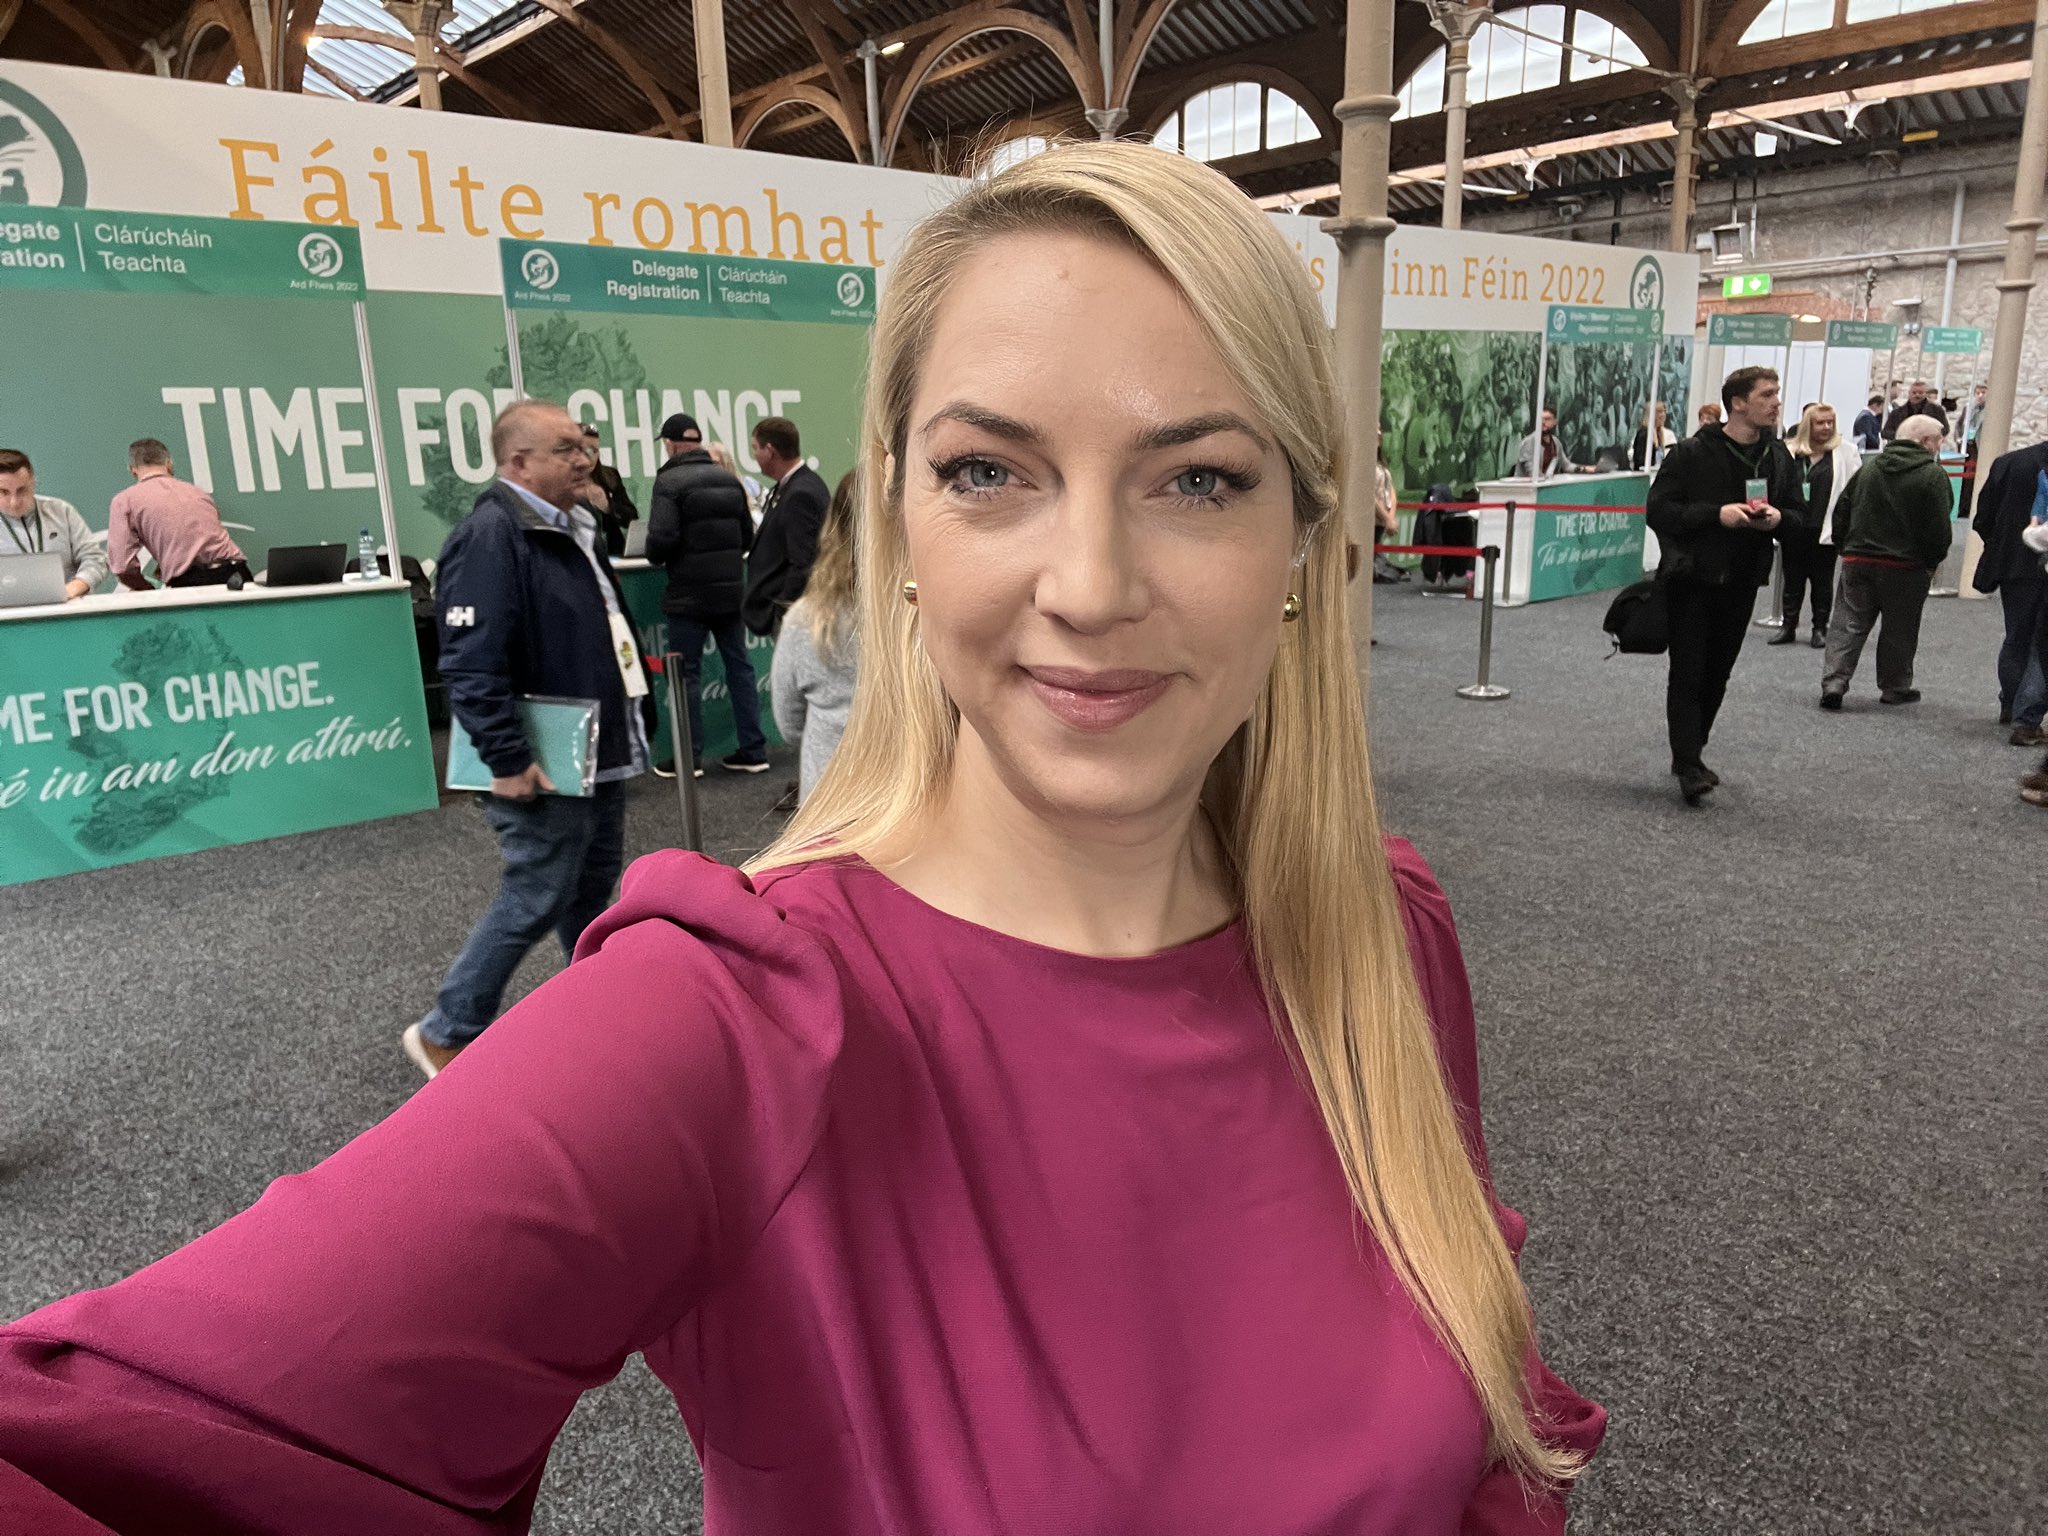 Emma Vardy On Twitter Im At The Sinn Fein Party Conference In Dublin So Whats On The Agenda